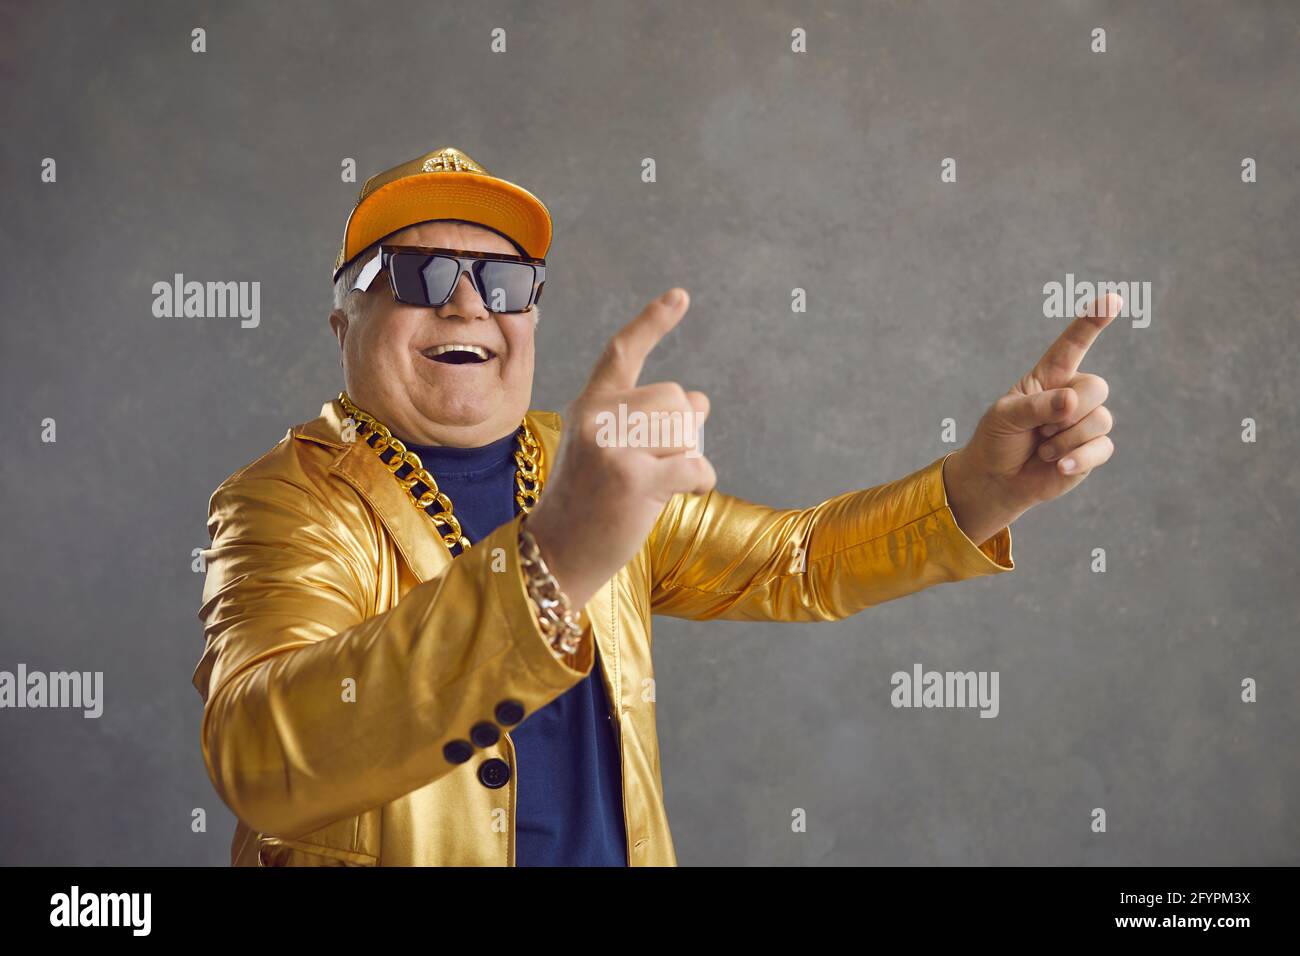 Funny senior man in golden jacket, baseball cap and chain necklace dancing and having fun Stock Photo